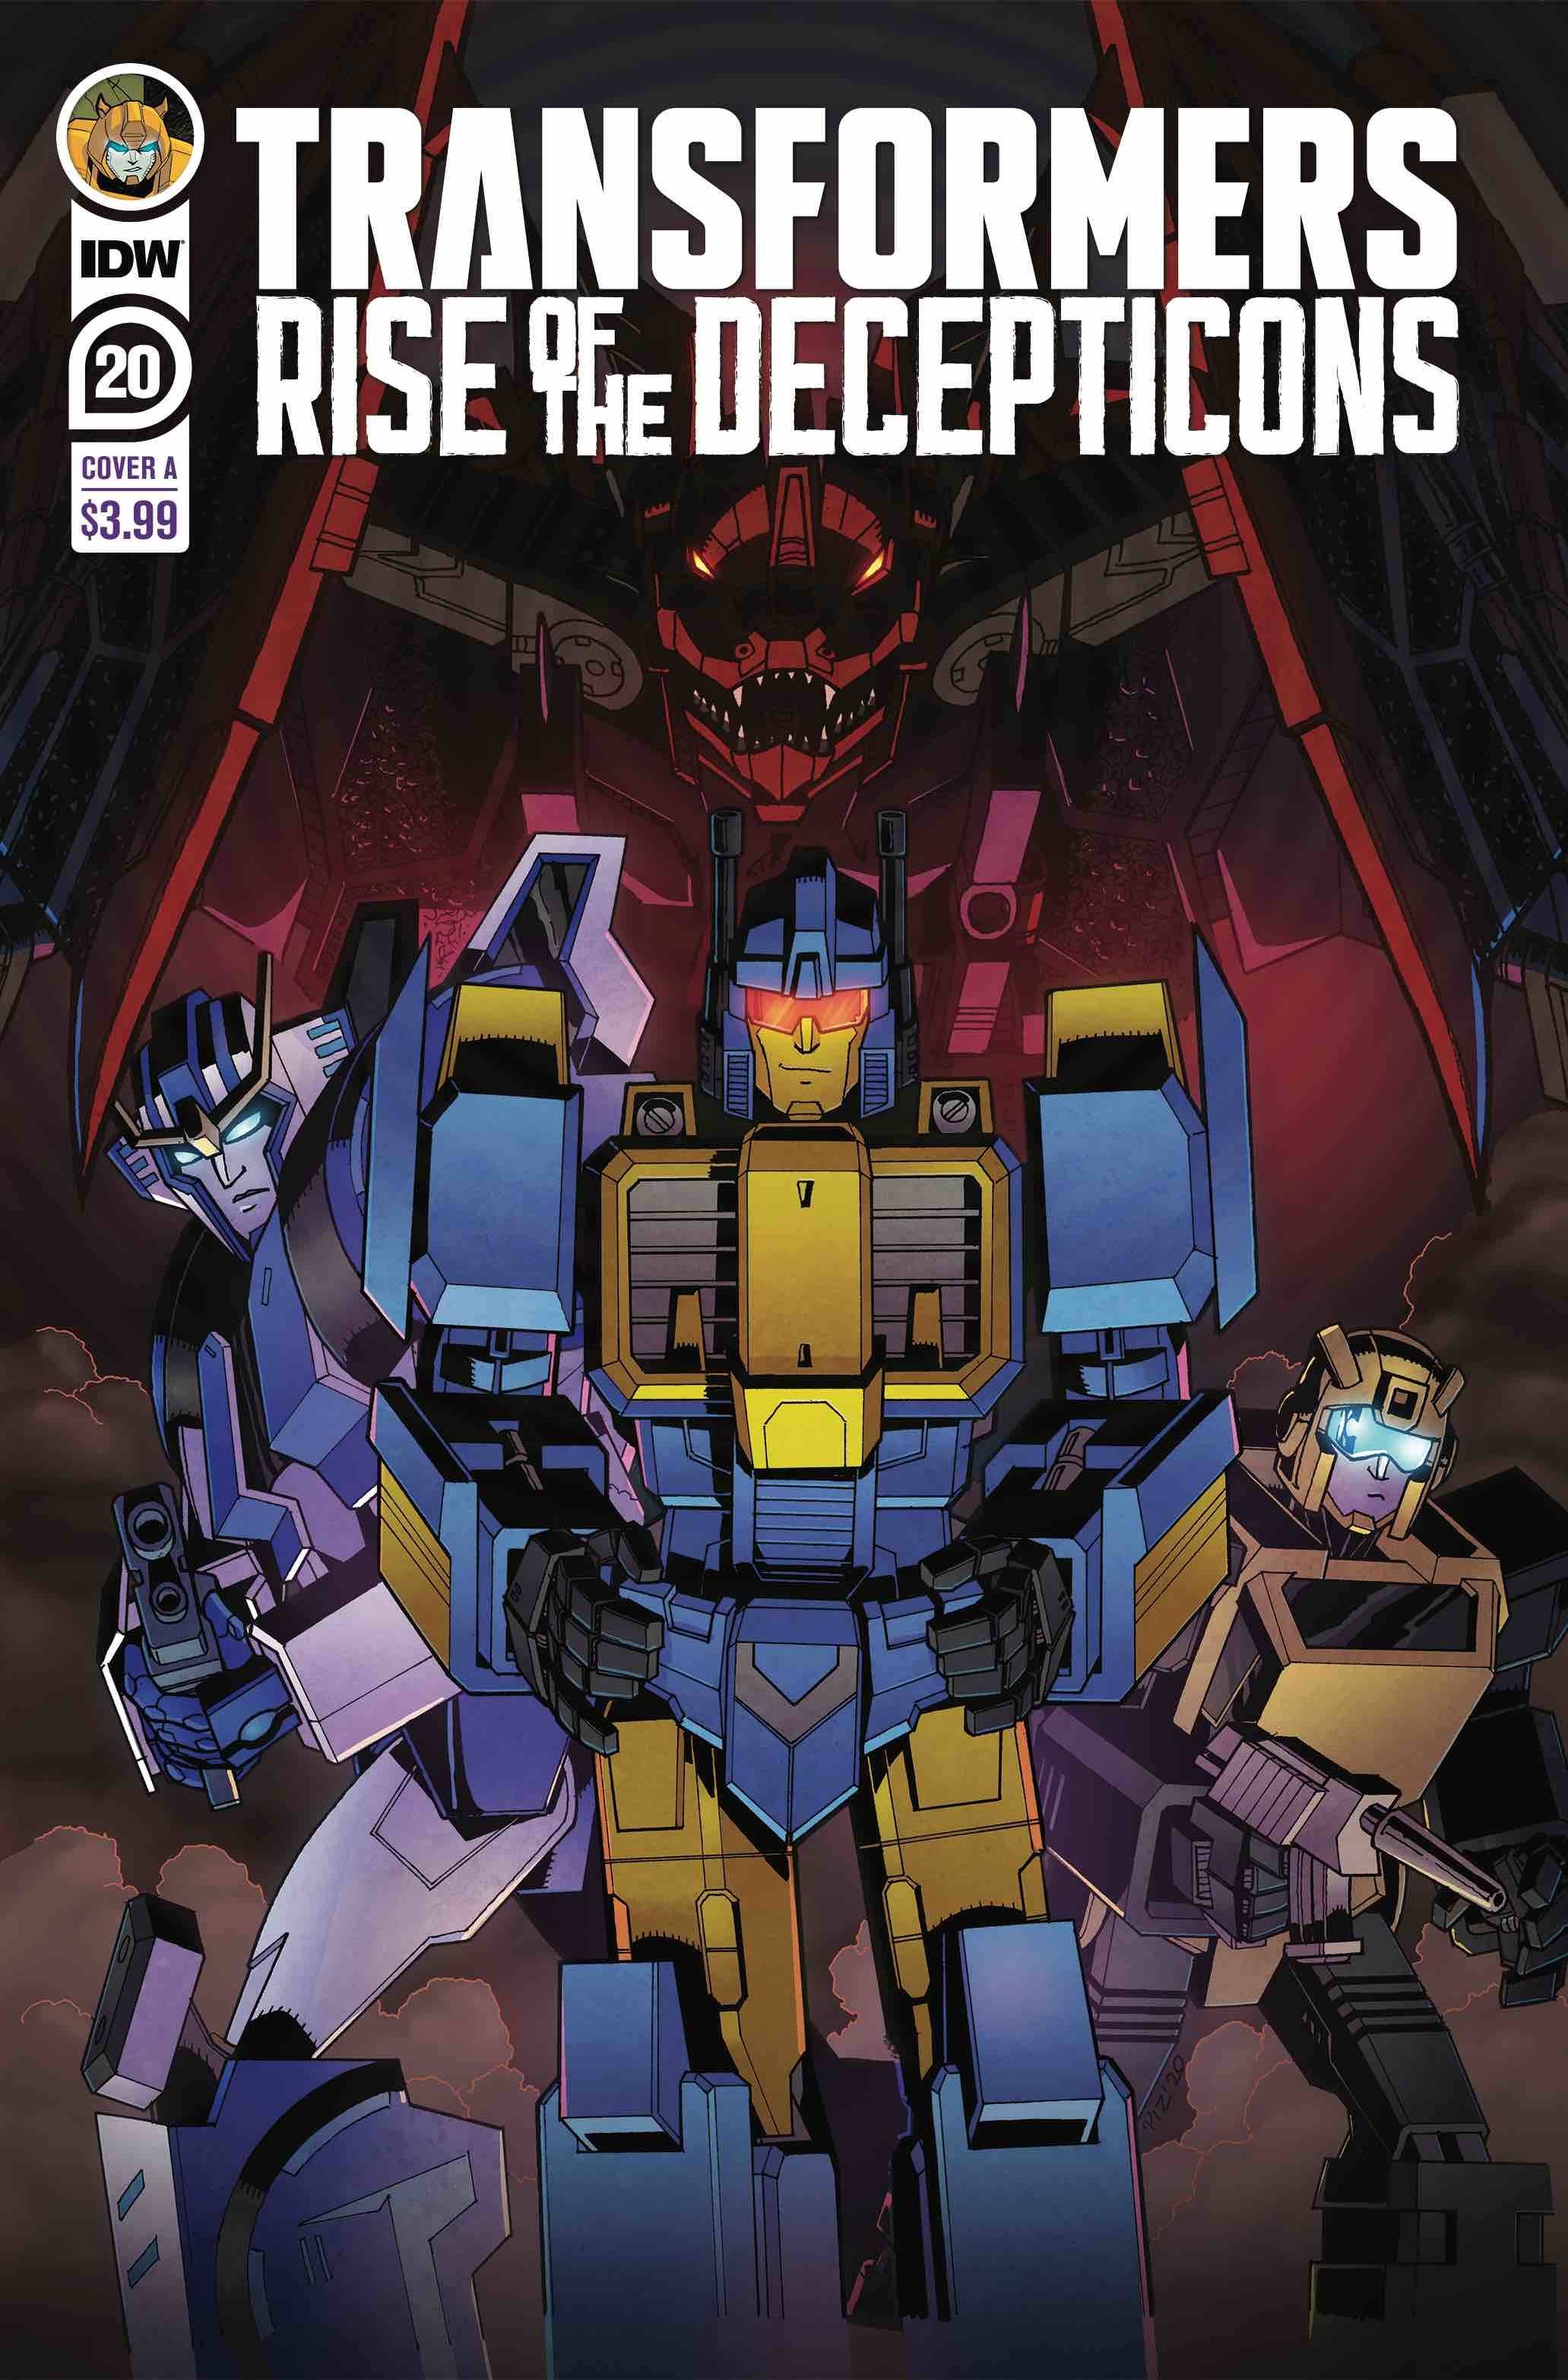 Transformers #20 Cover A Pirrie